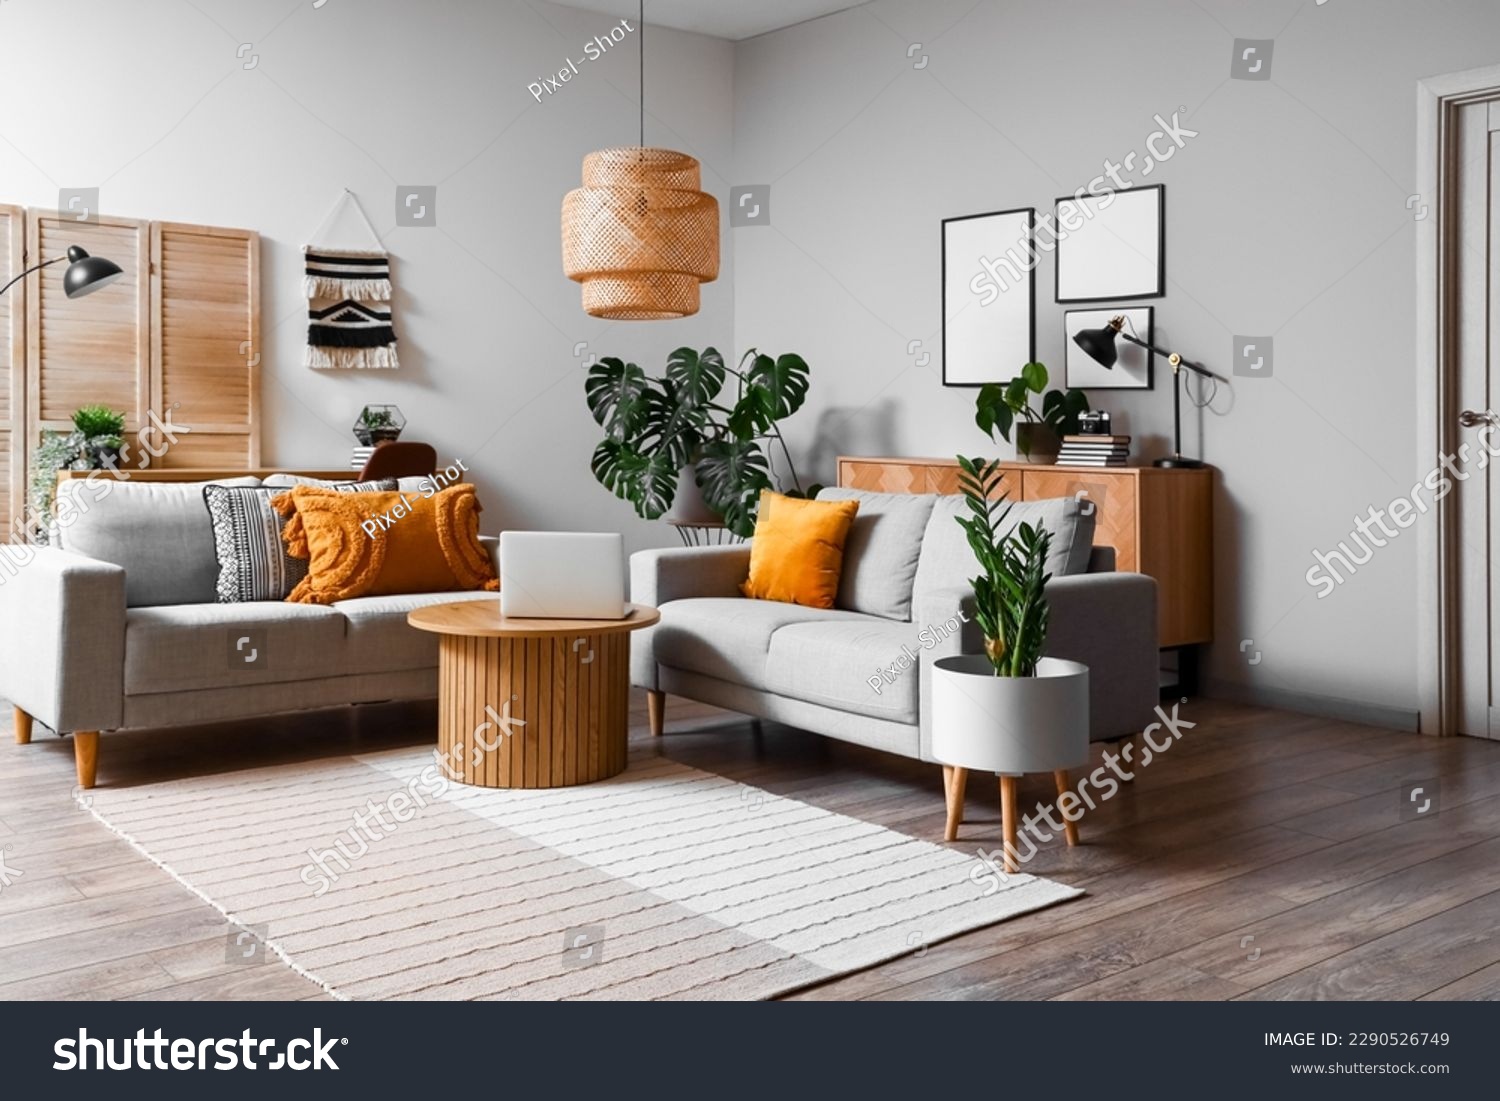 Interior of living room with green houseplants and sofas #2290526749